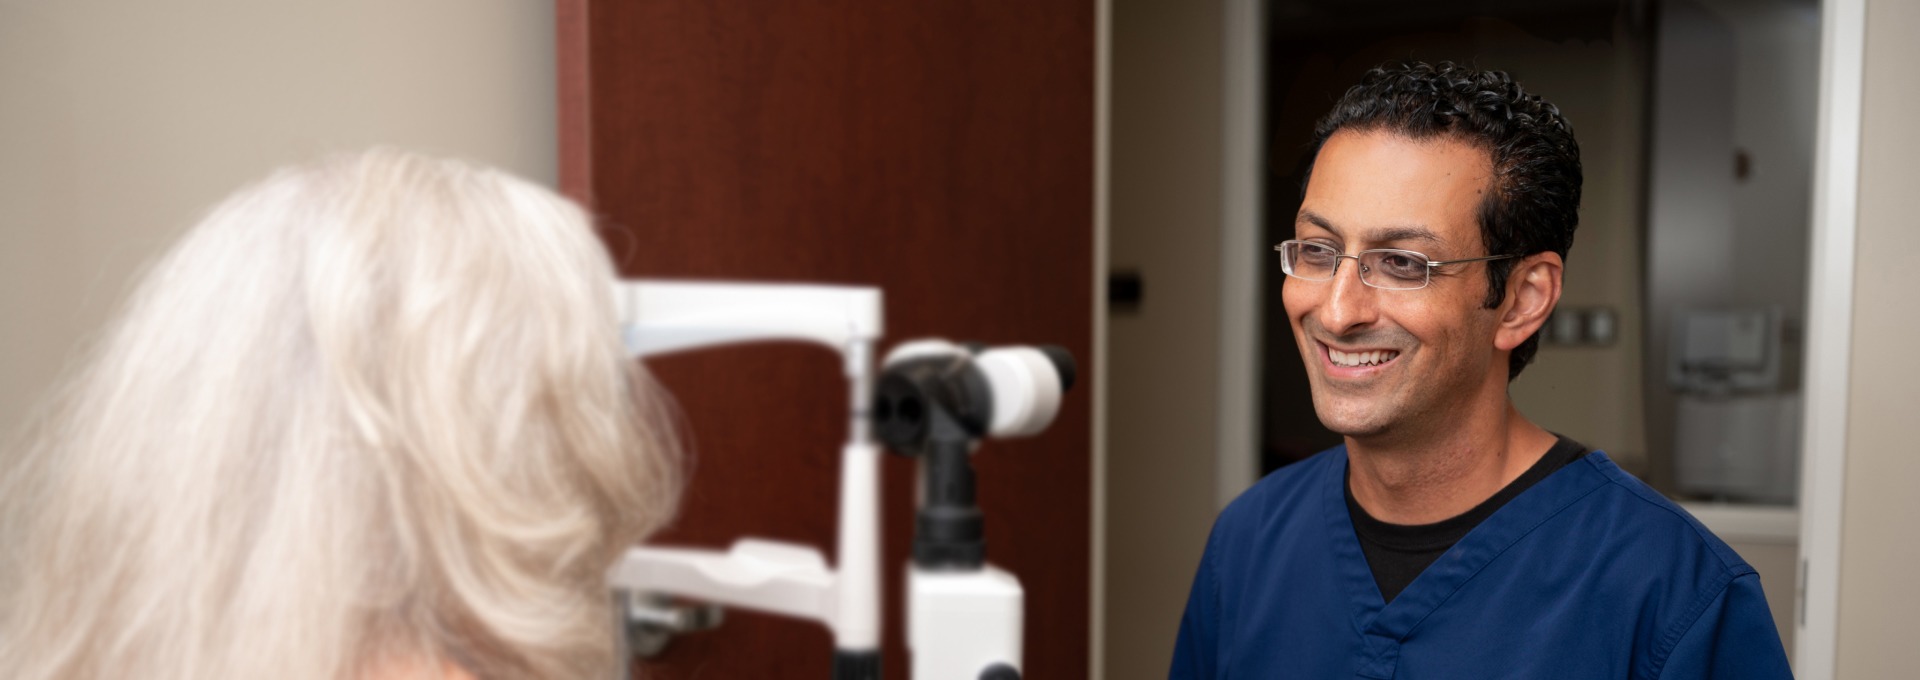 Ighani Eye Care: Board-Certified Ophthalmologist Dallas-Fort Worth